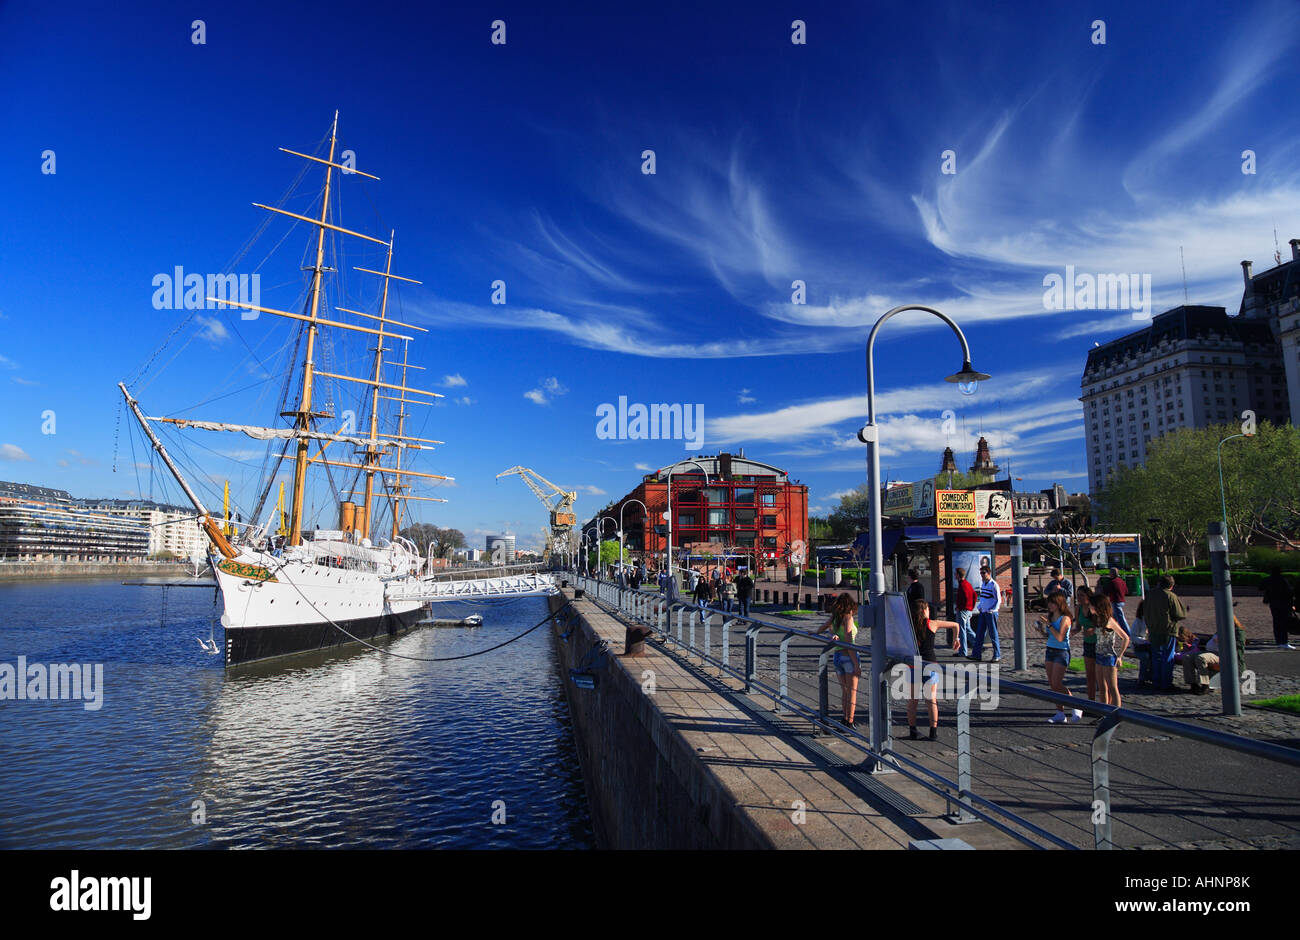 Frigate Sarmiento at Puerto Madero with people walking, Buenos Aires Argentina Stock Photo